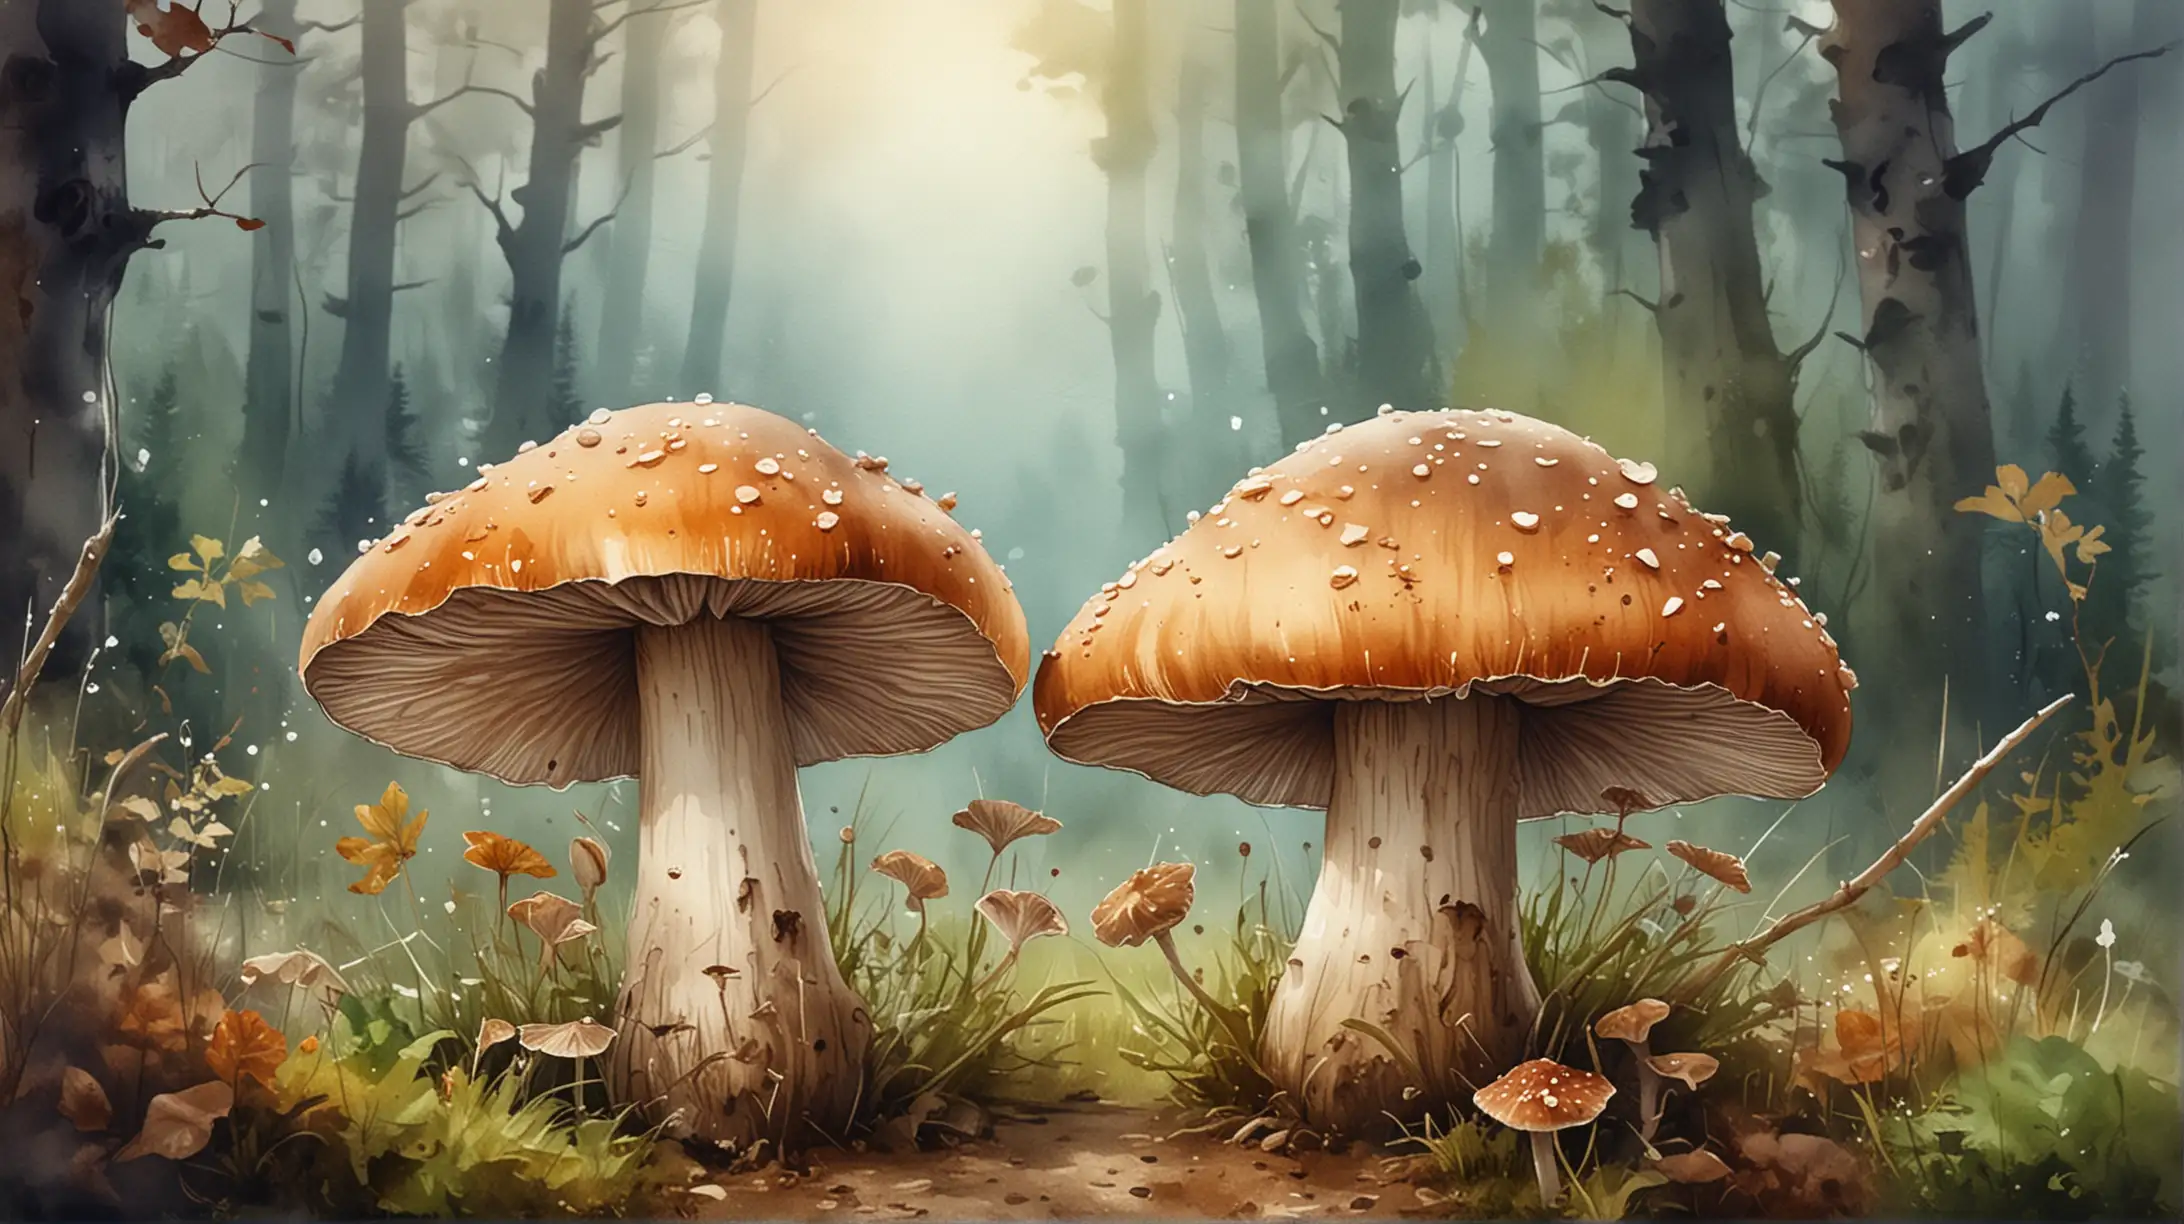 generate a painting in watercolor style about a mushroom